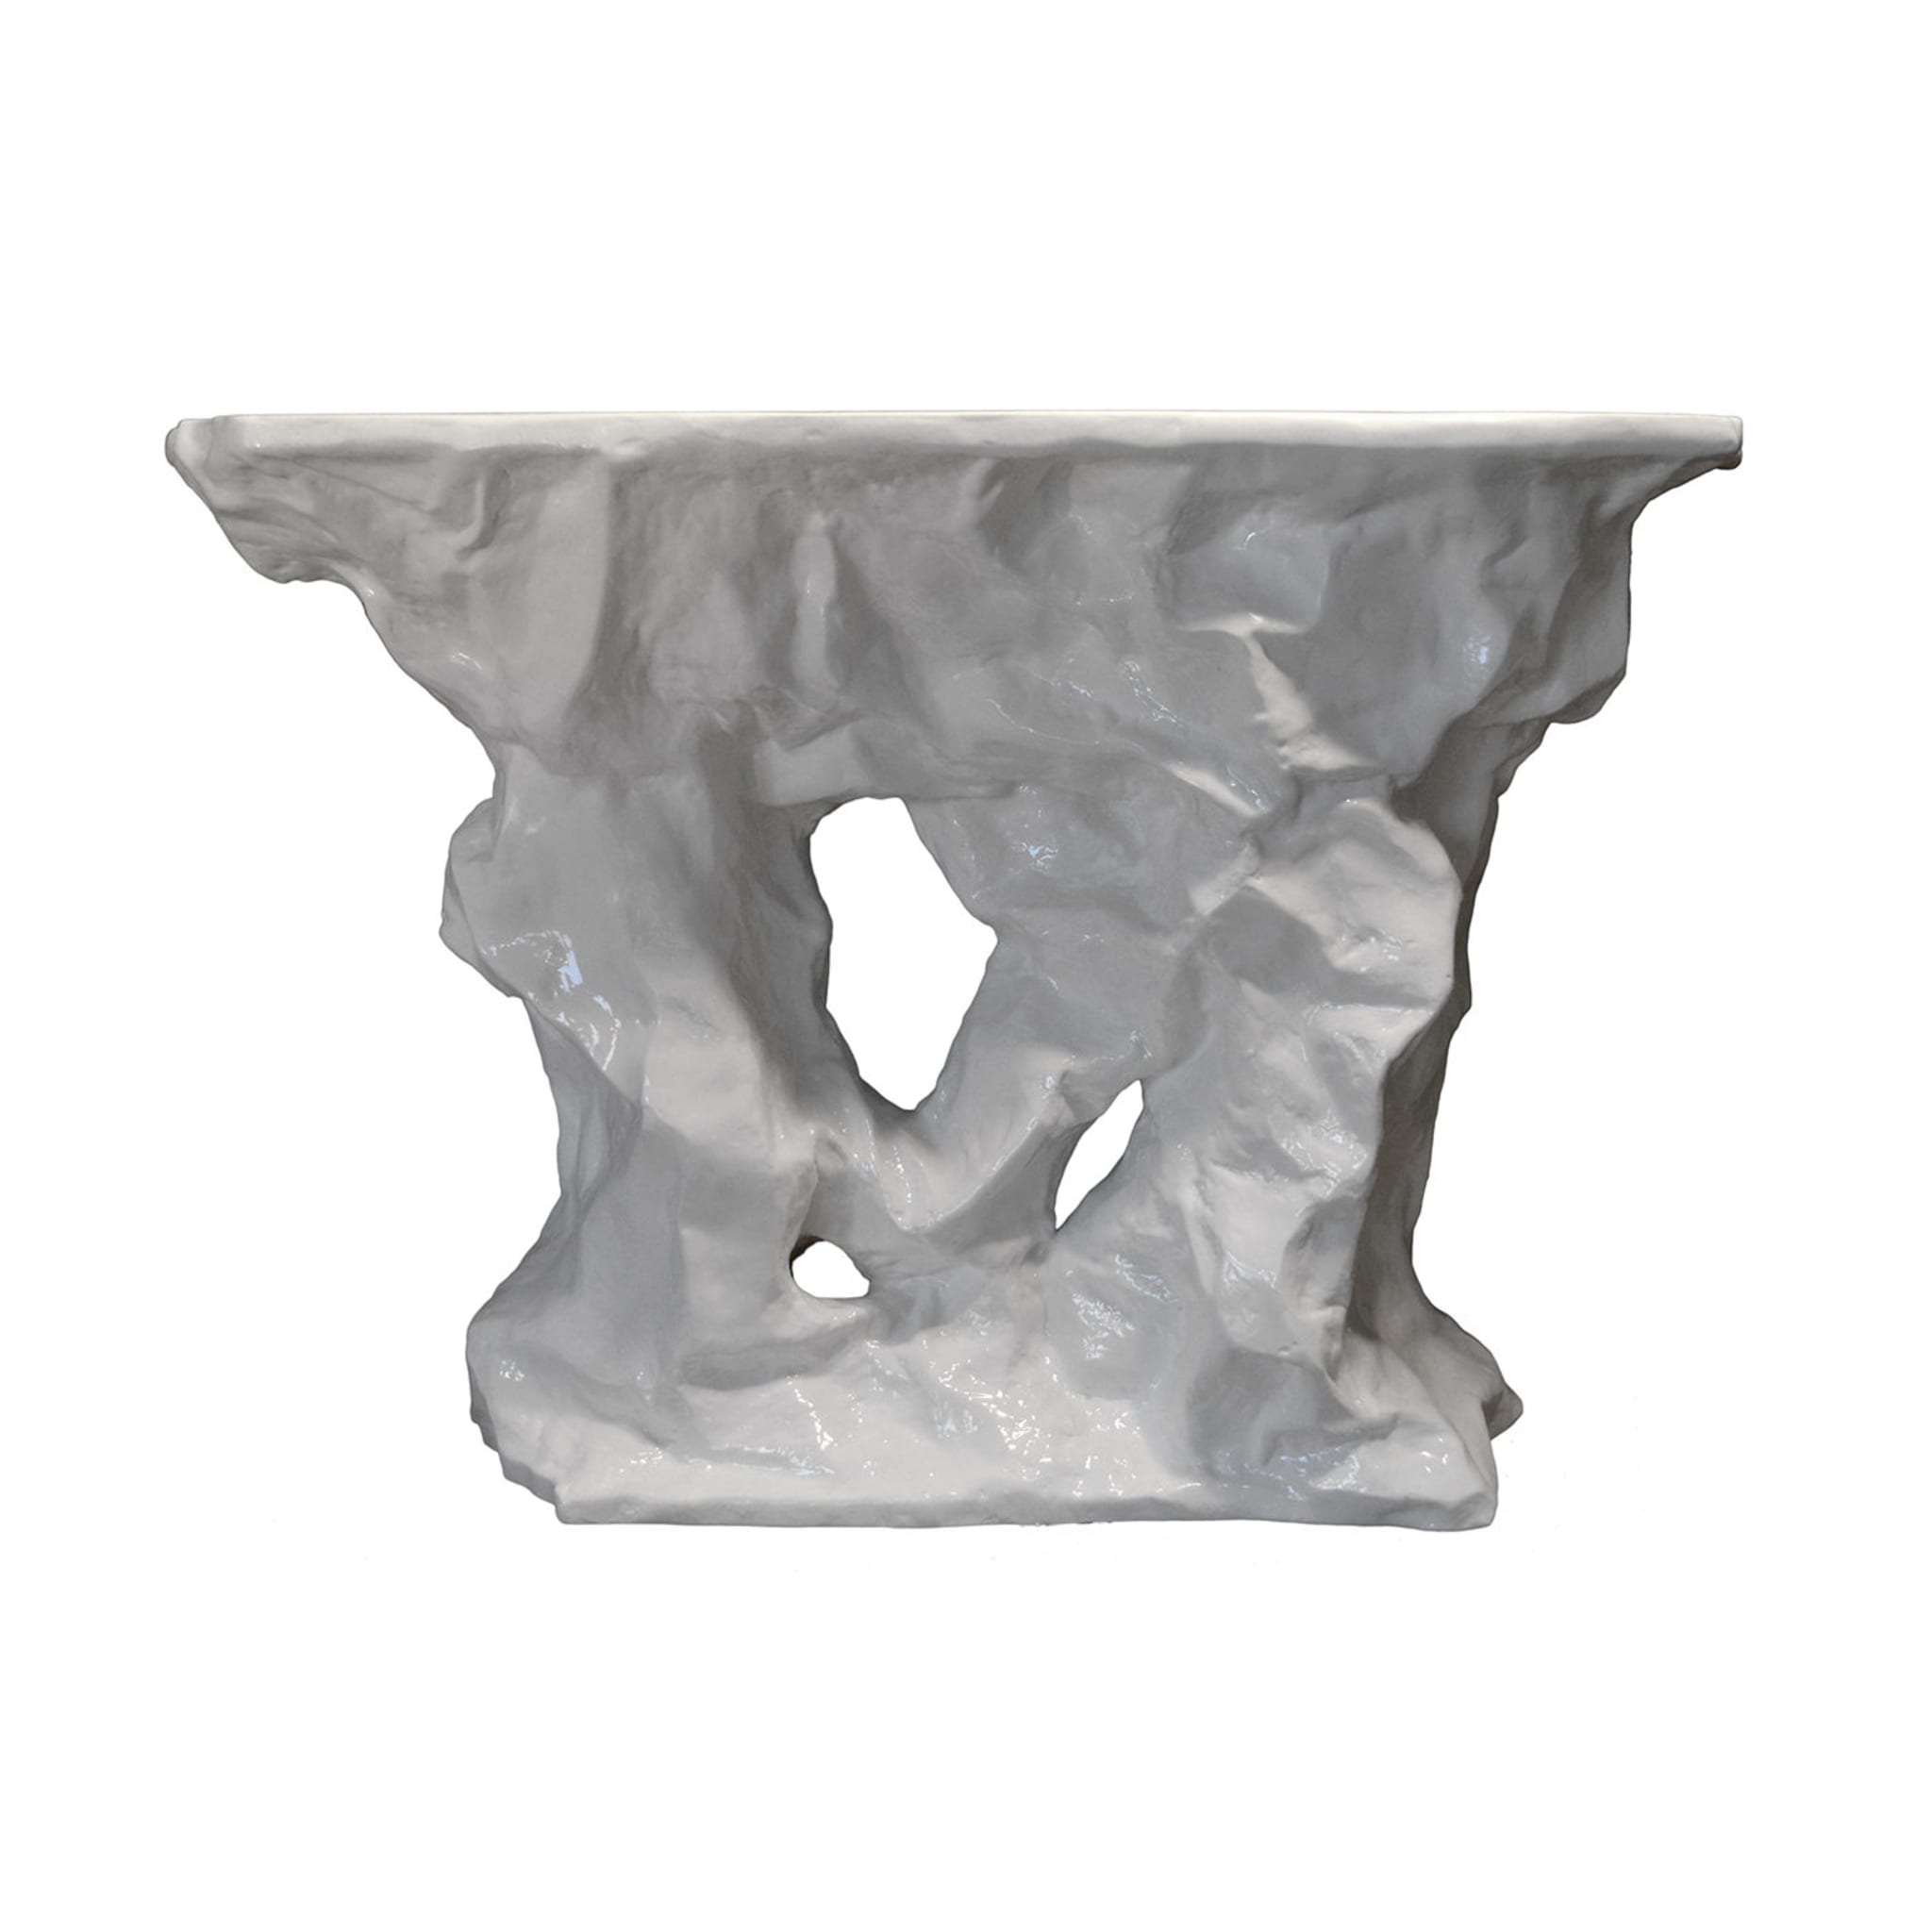 Glacial Sculpture Iceberg Console Limited Edition - Alternative view 1